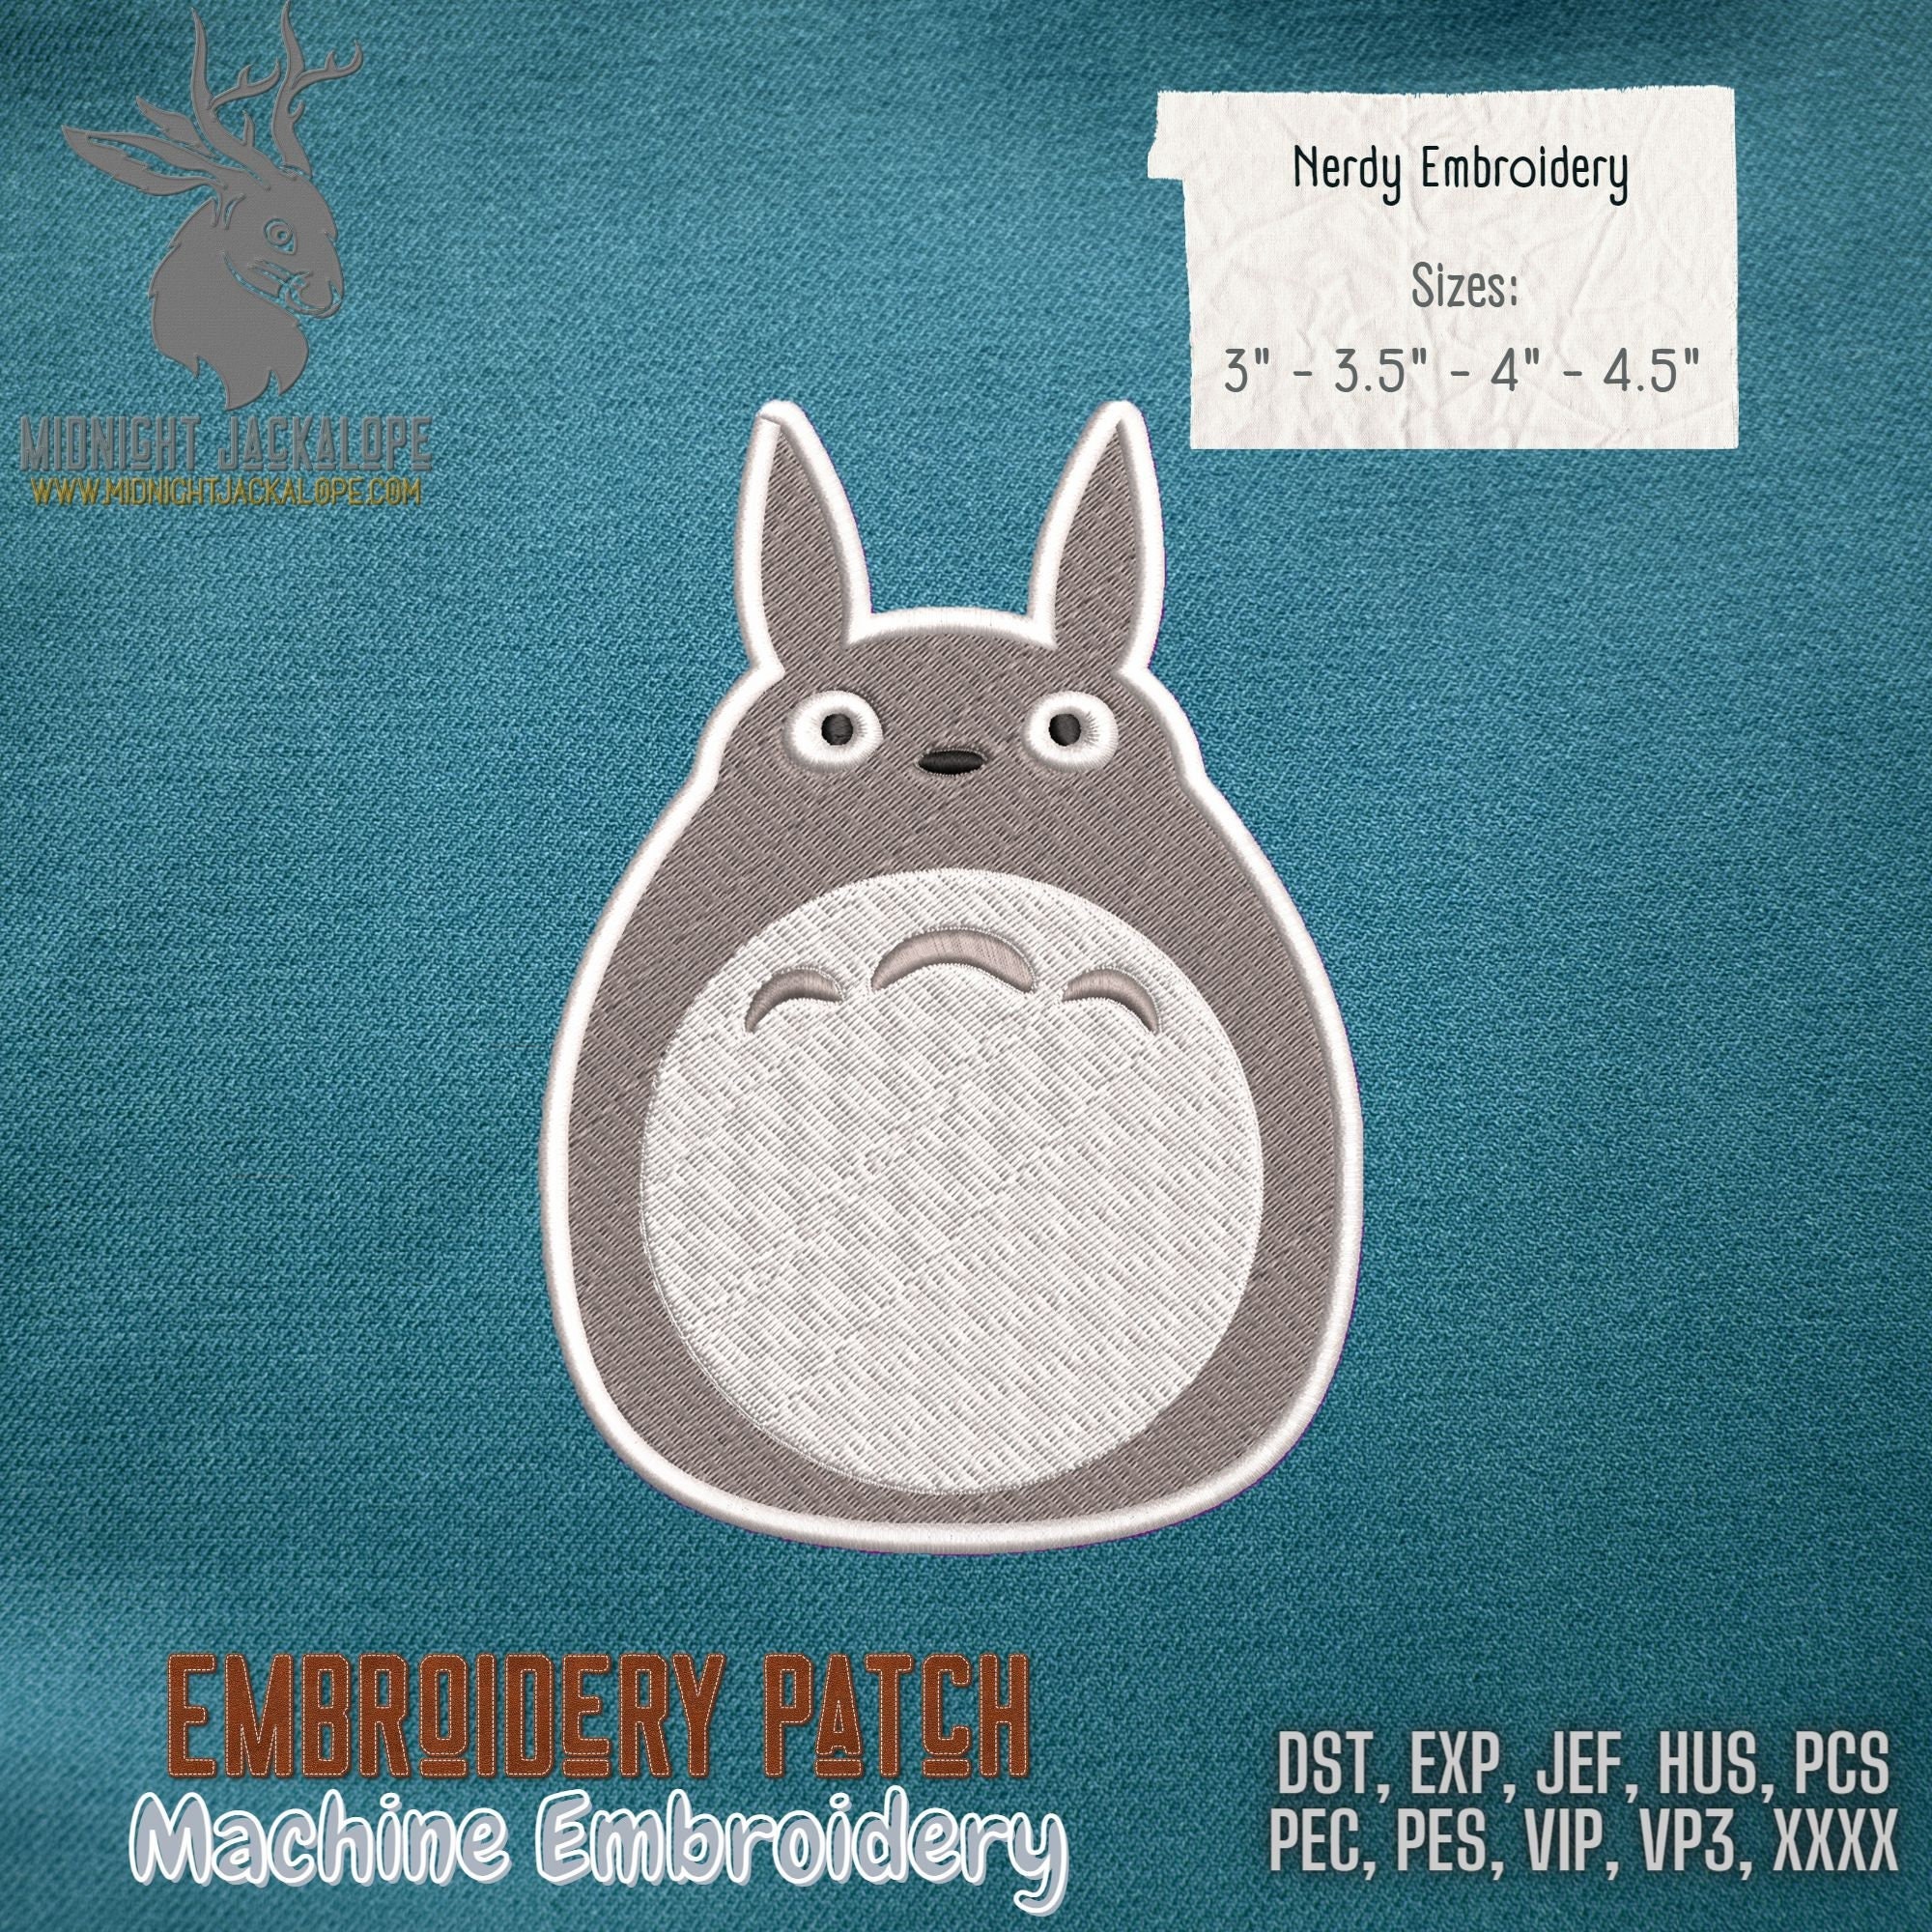 ➤ iron on PATCH TOTORO | Cool Anime Large Iron on Patch